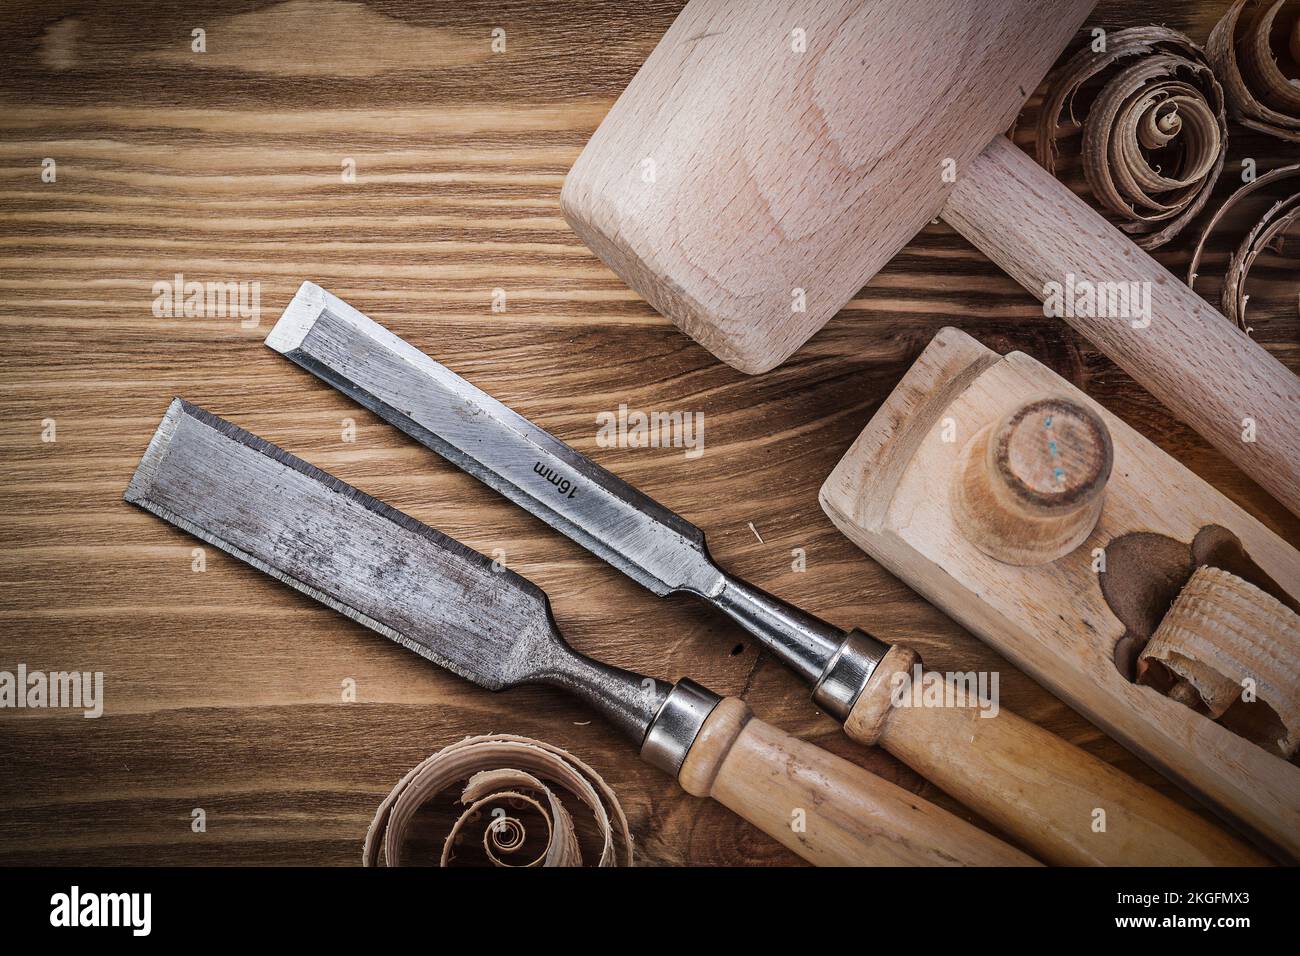 Wooden mallet planer flat chisels curled shavings on vintage wood board construction concept. Stock Photo